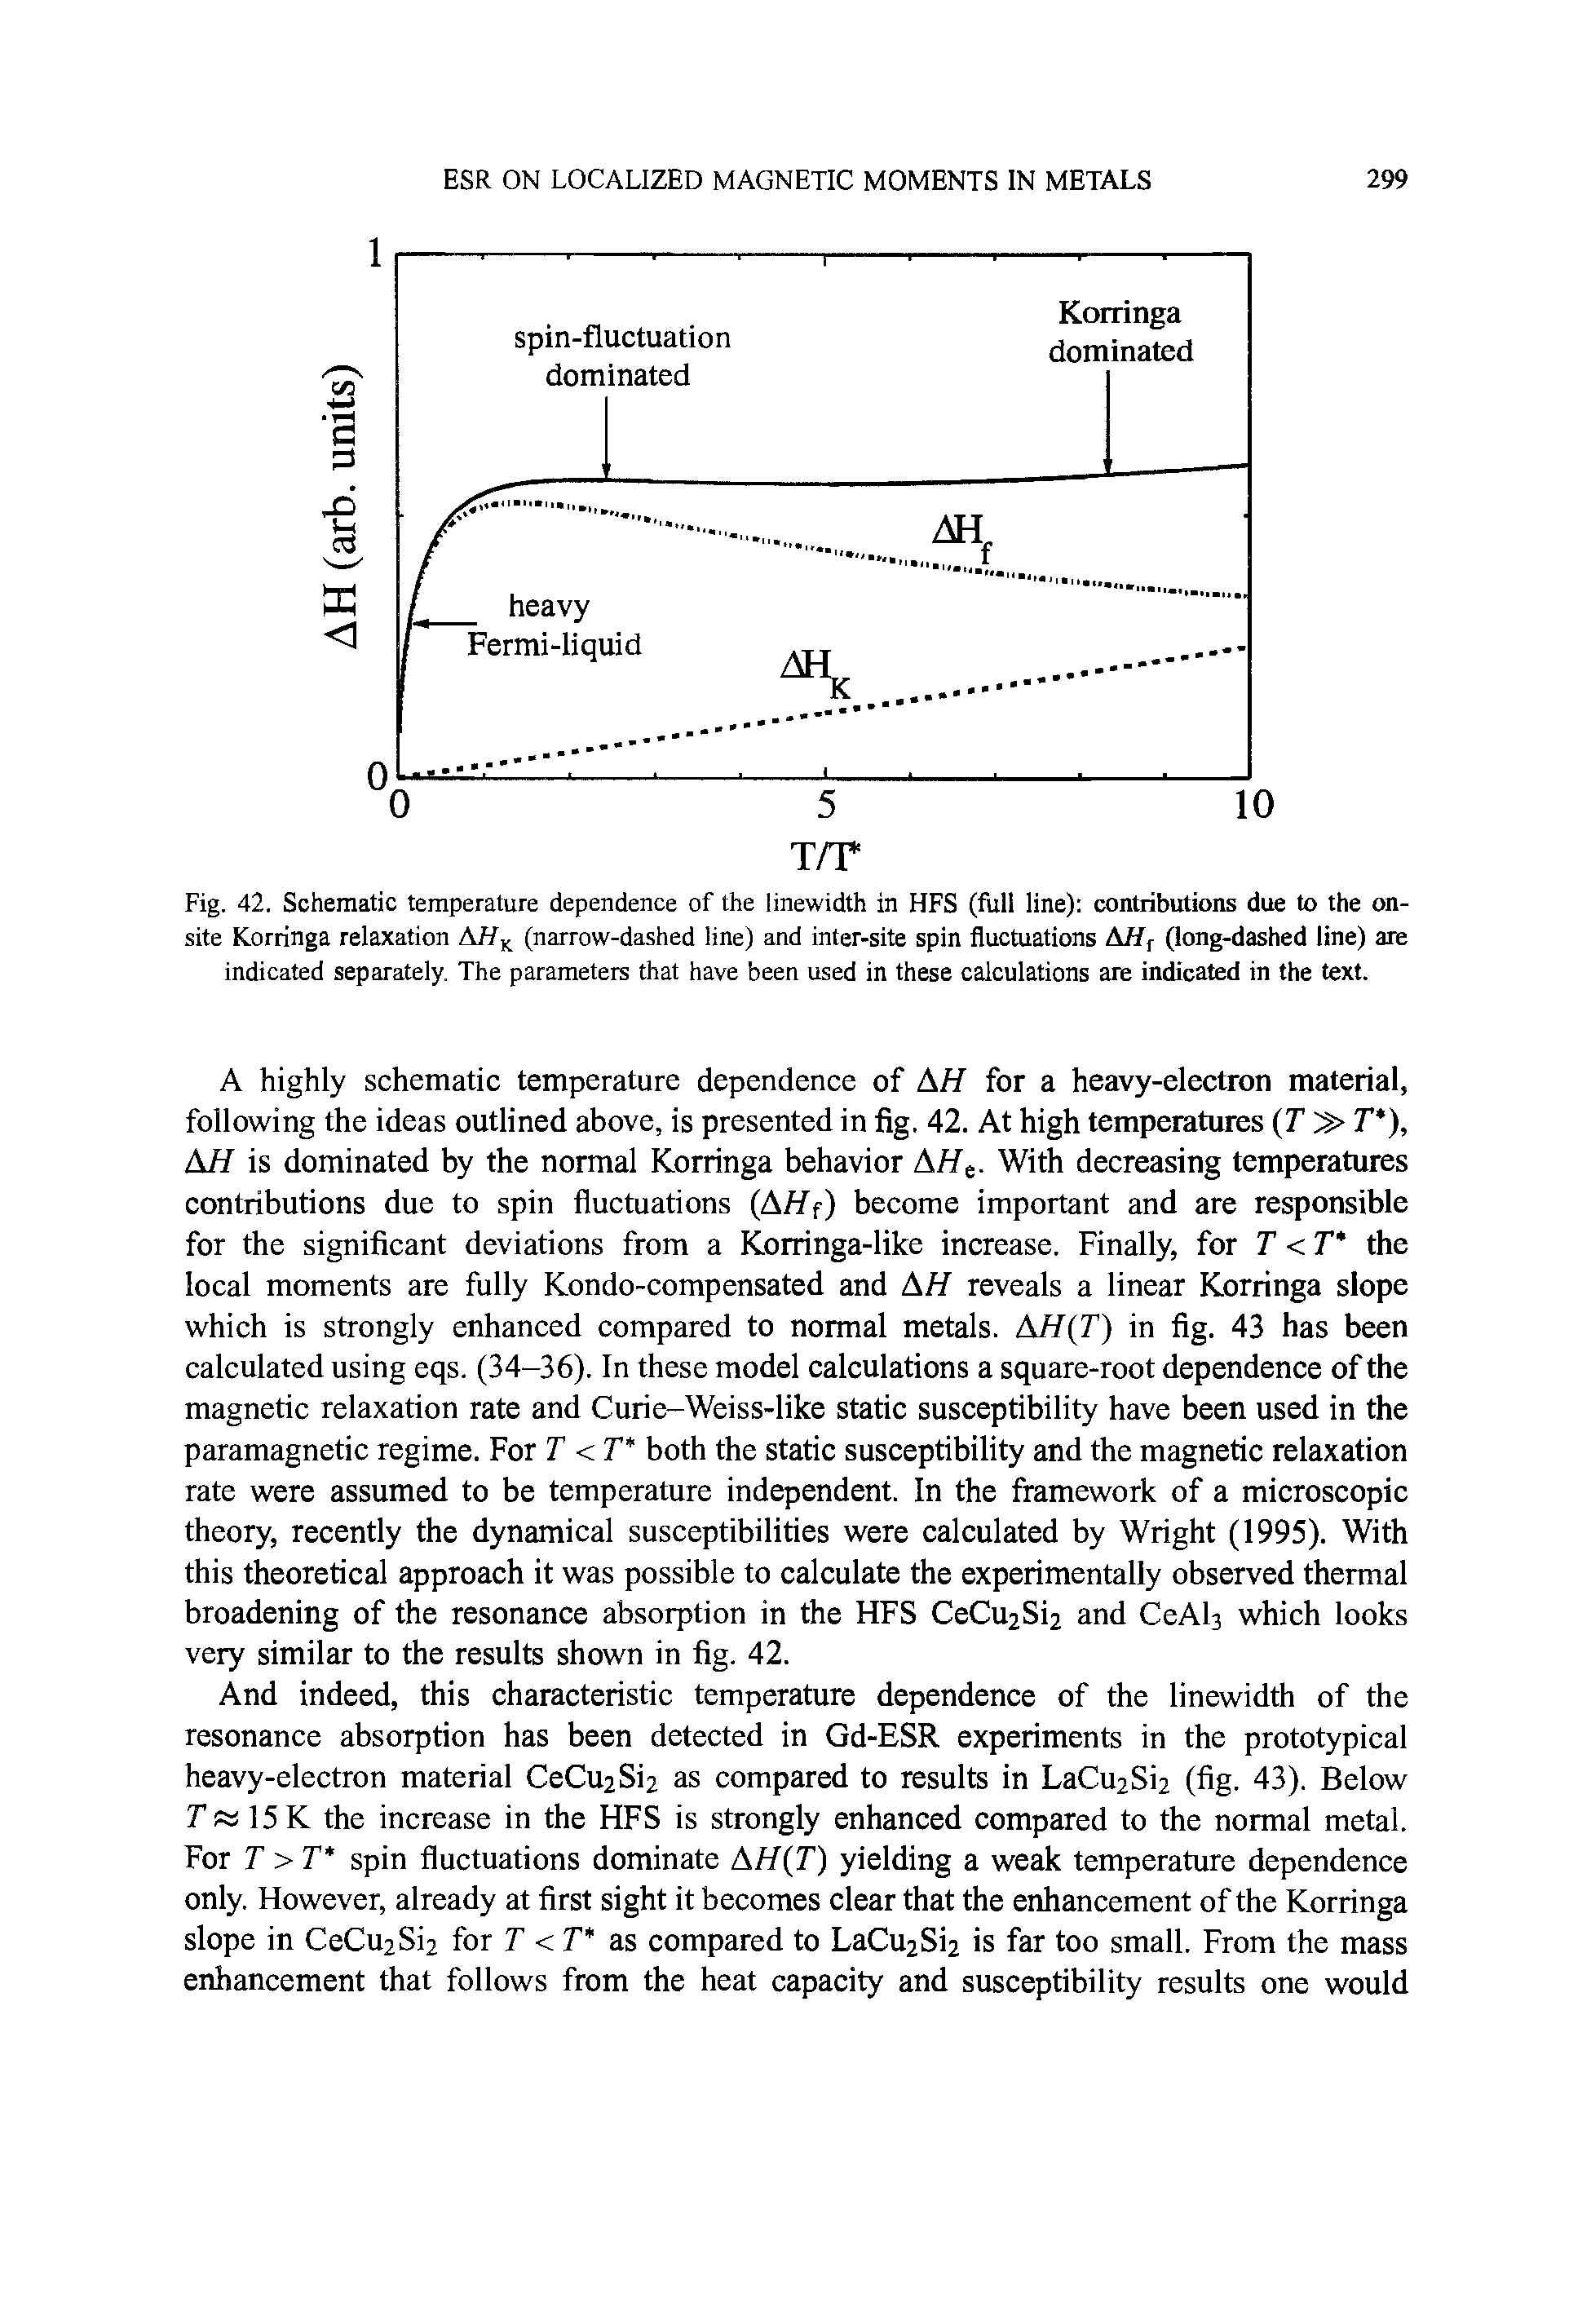 Fig. 42. Schematic temperature dependence of the linewidth in HFS (full line) contributions due to the onsite Korringa relaxation Aff (narrow-dashed line) and inter-site spin fluctuations Afff (long-dashed line) are indicated separately. The parameters that have been used in these calculations are indicated in the text.